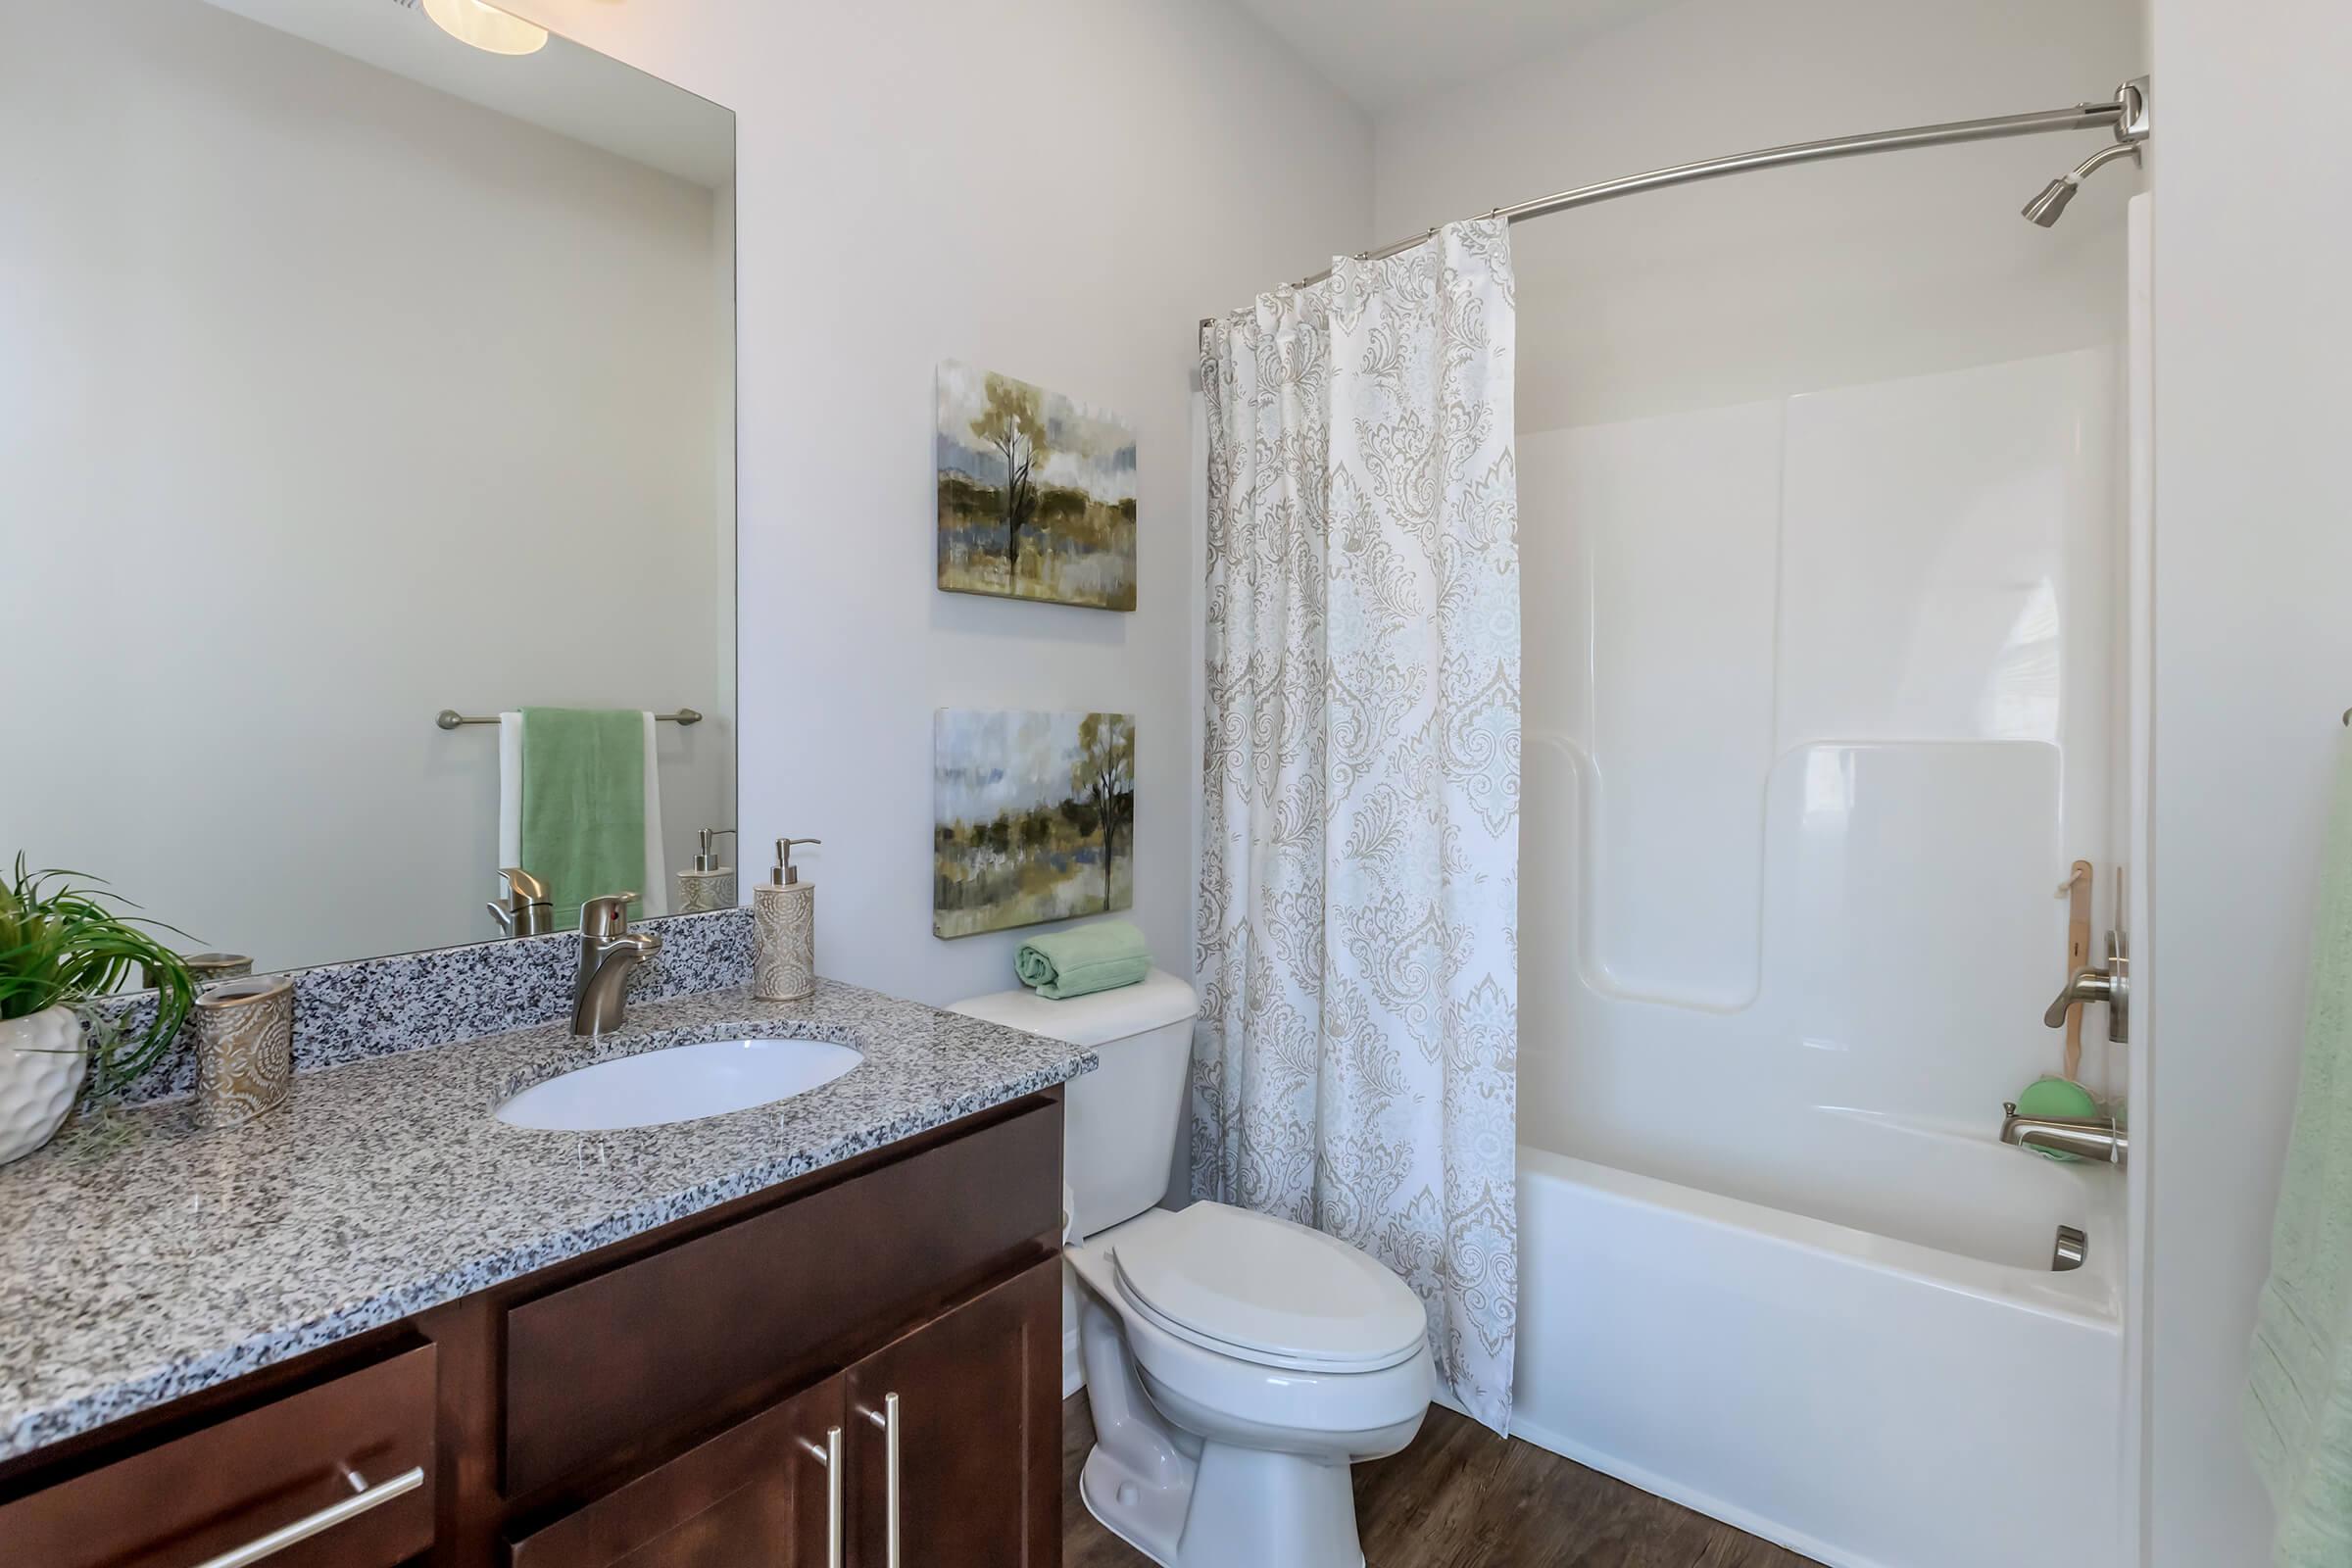 Belhaven Offers Modern Bathrooms At Riverstone Apartments At Long Shoals In Arden, NC